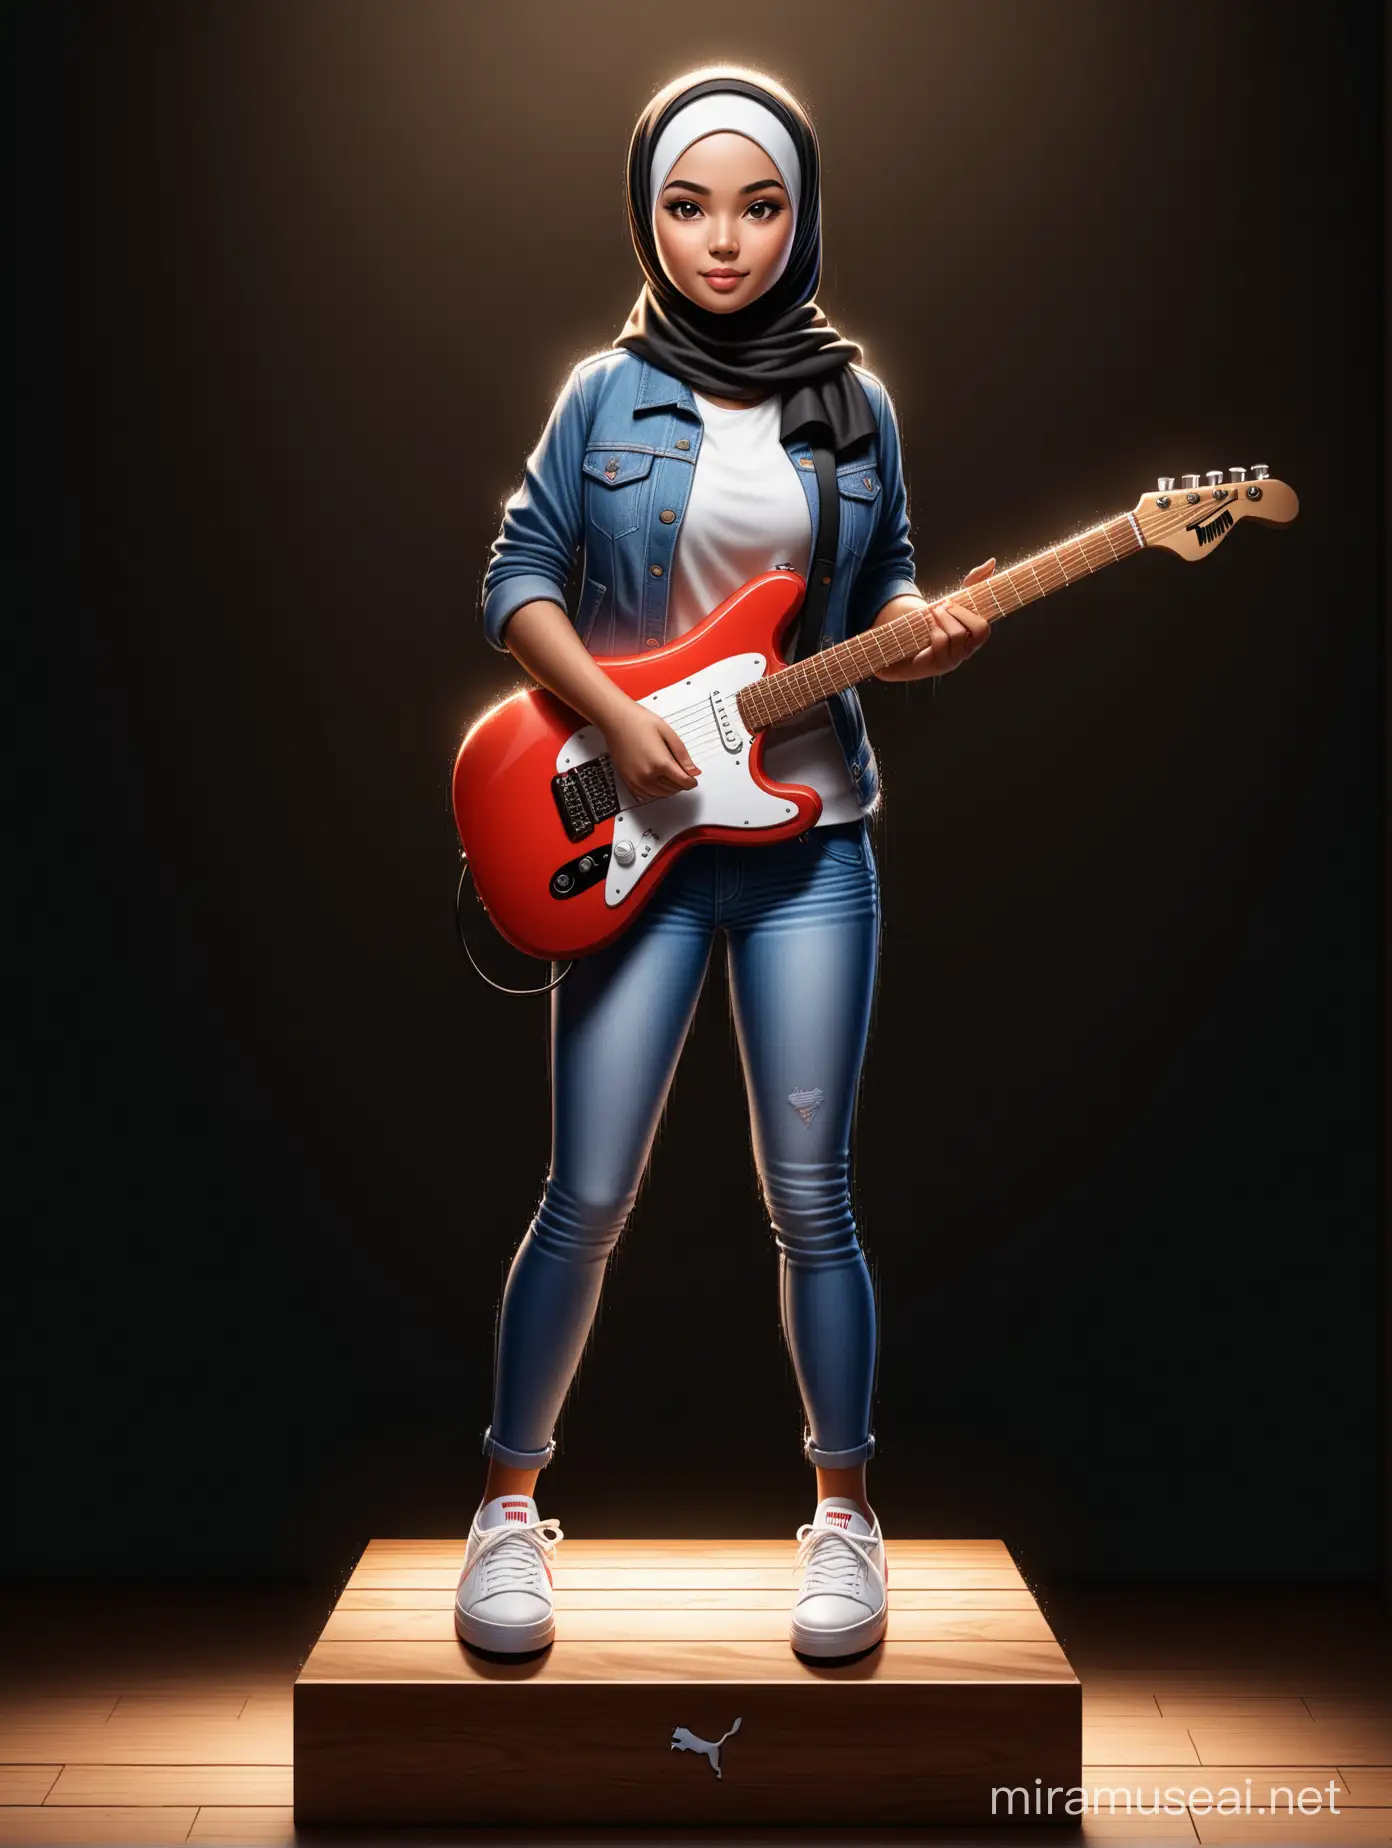 Hyperrealistic Indonesian Girl in Hijab Playing Electric Guitar on Wooden Box